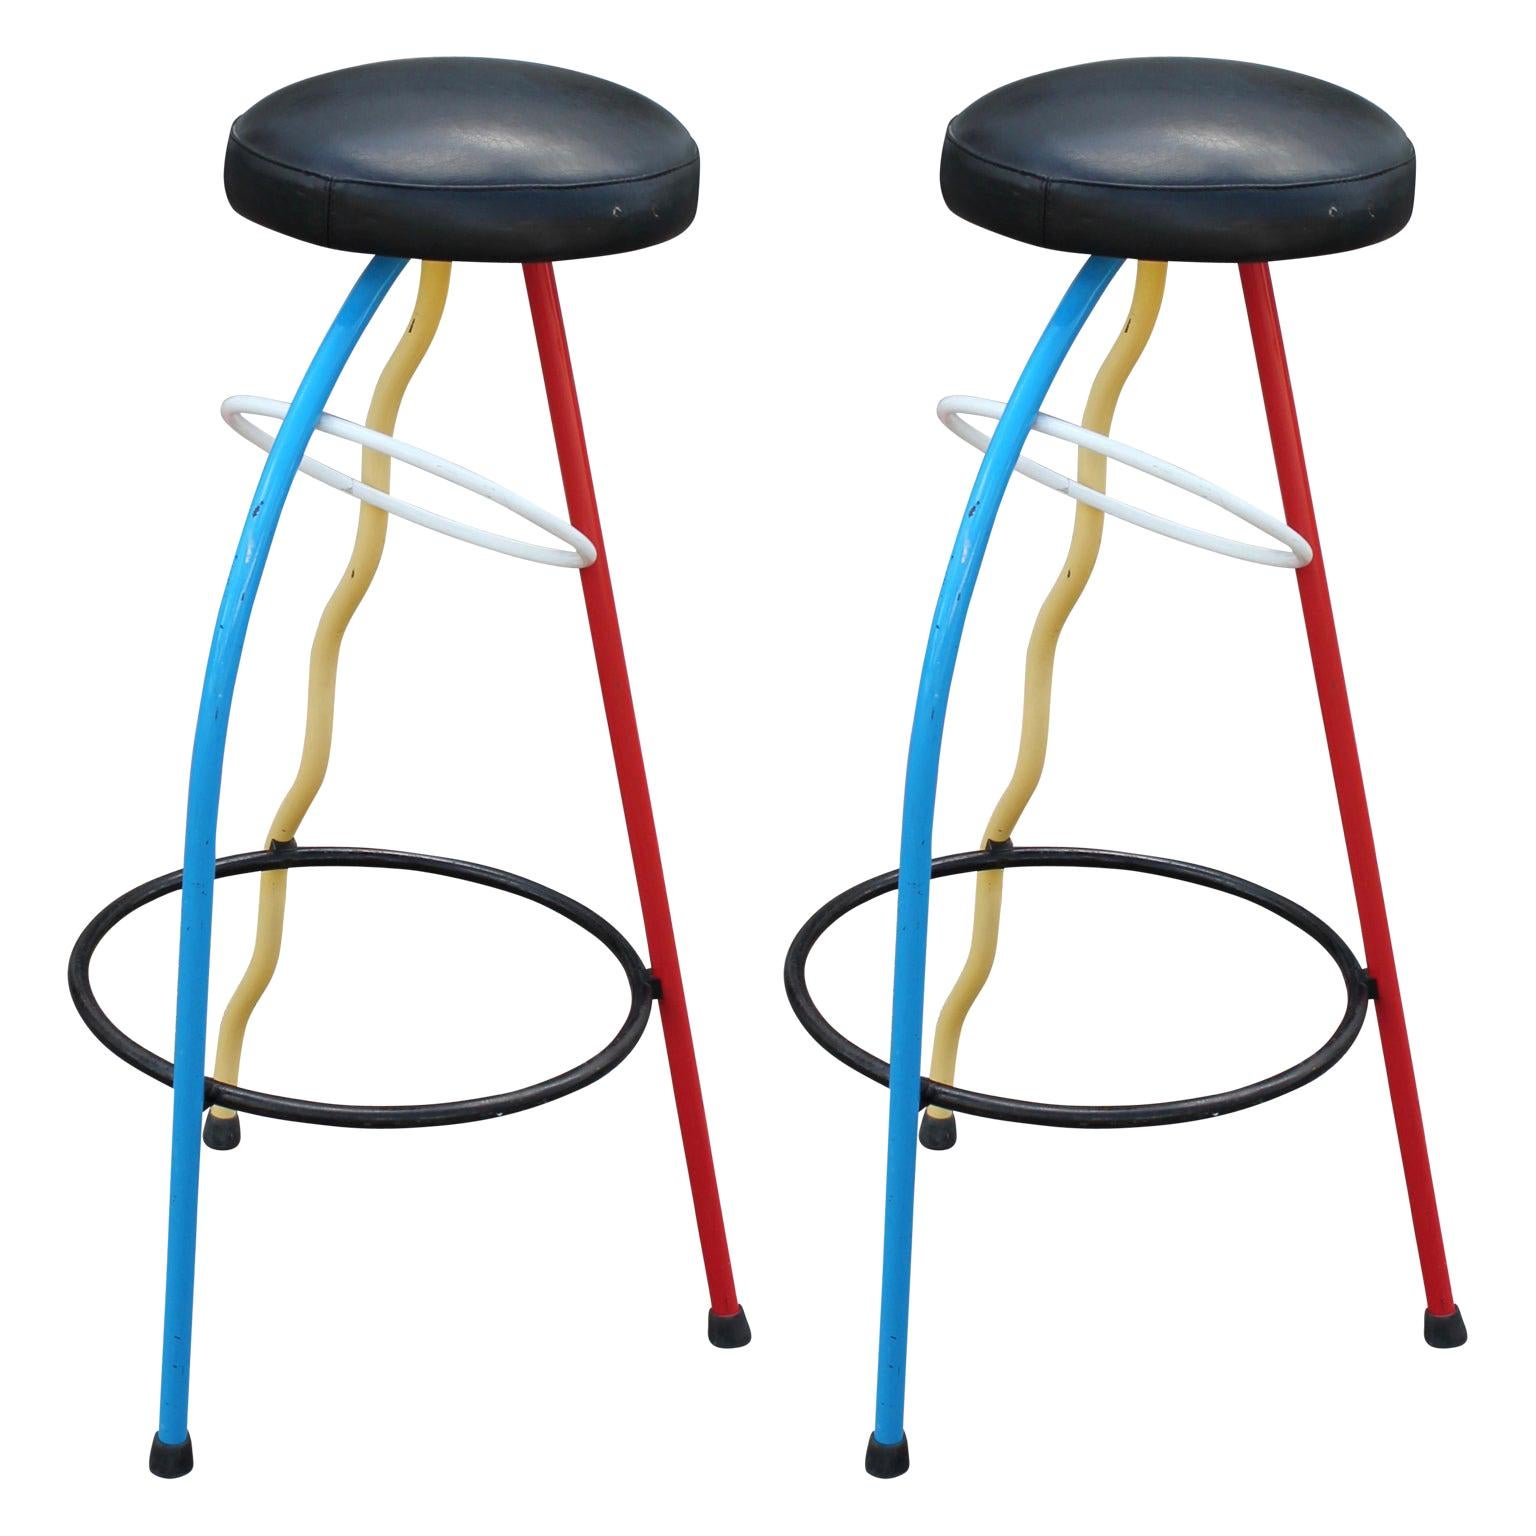 Pair of Javier Mariscal Memphis Duplex Bar Stools in Red, Blue, and Yellow